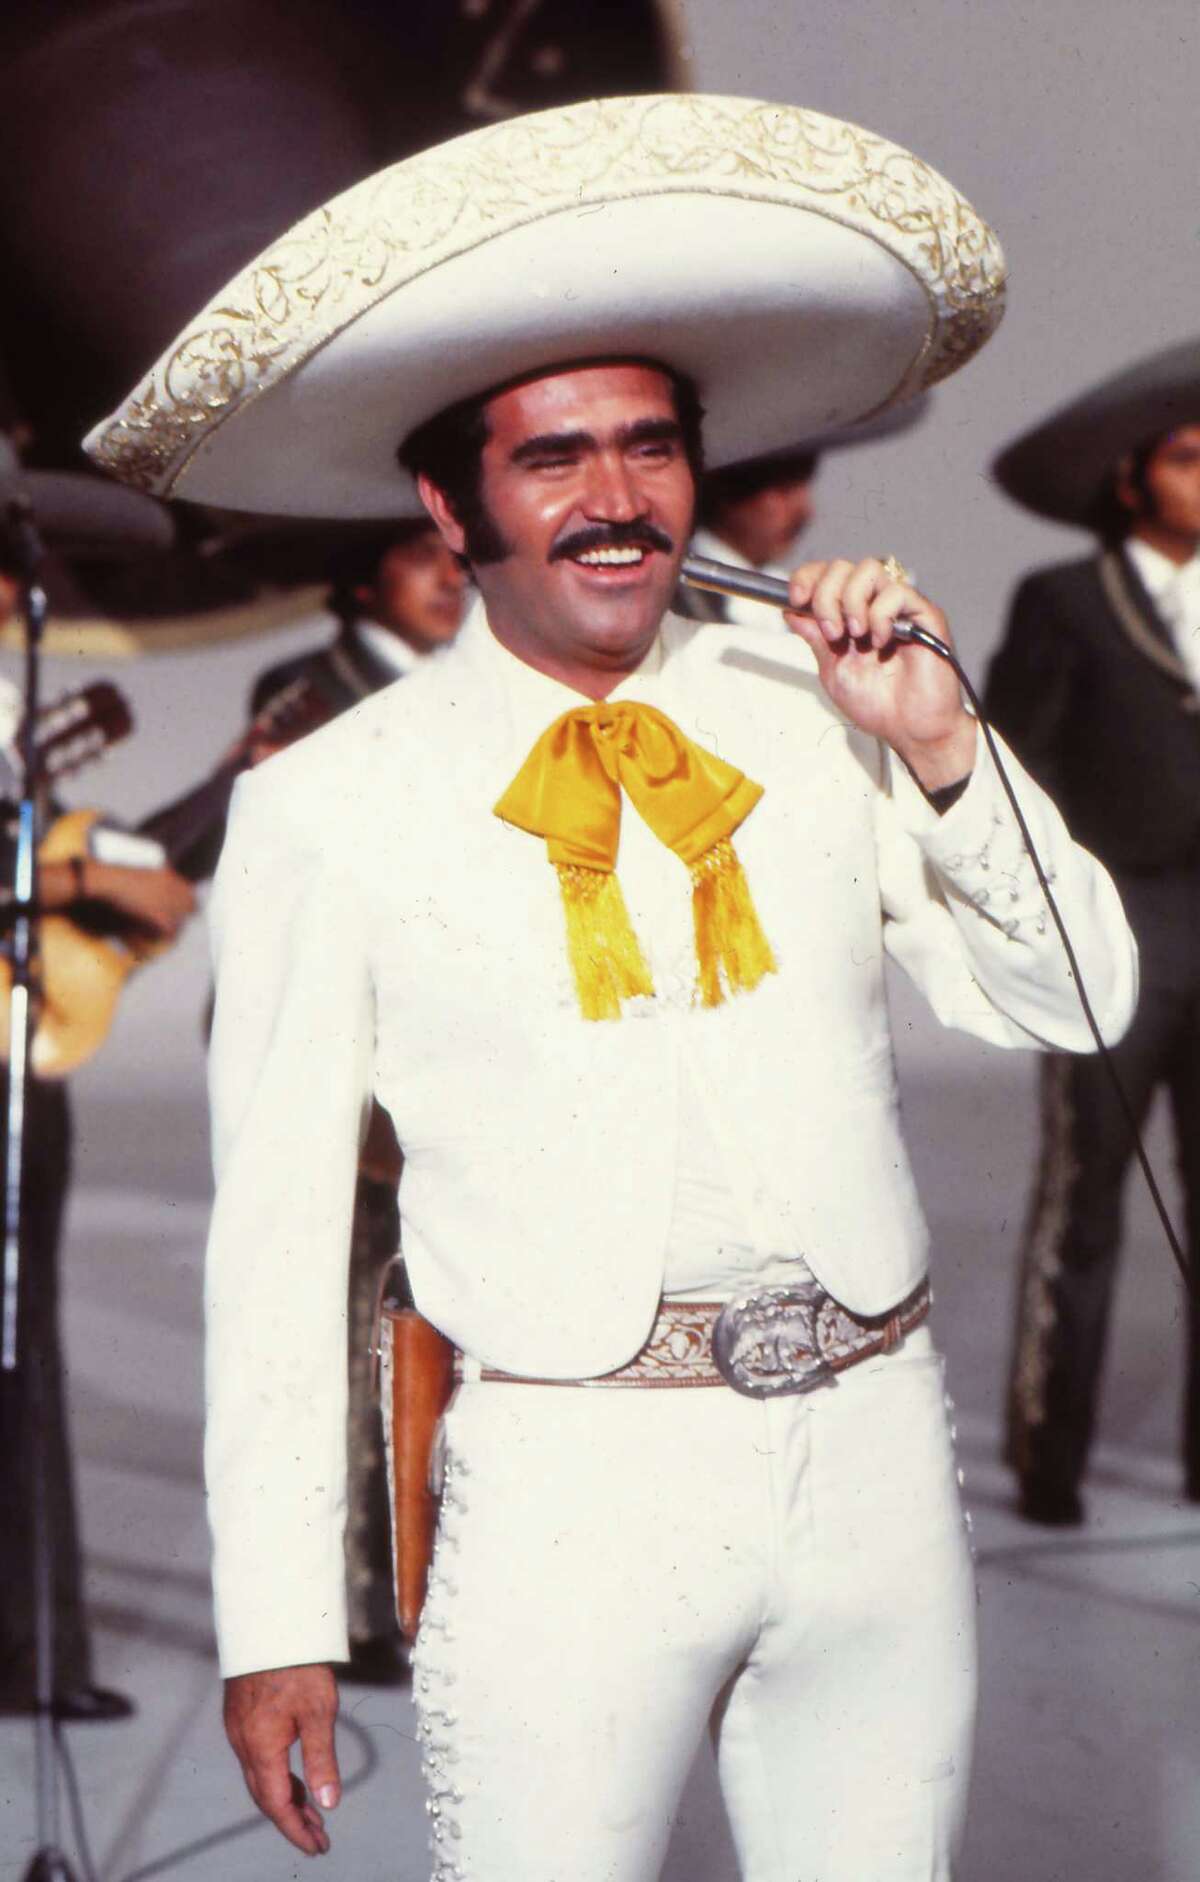 who did vicente fernandez tour with